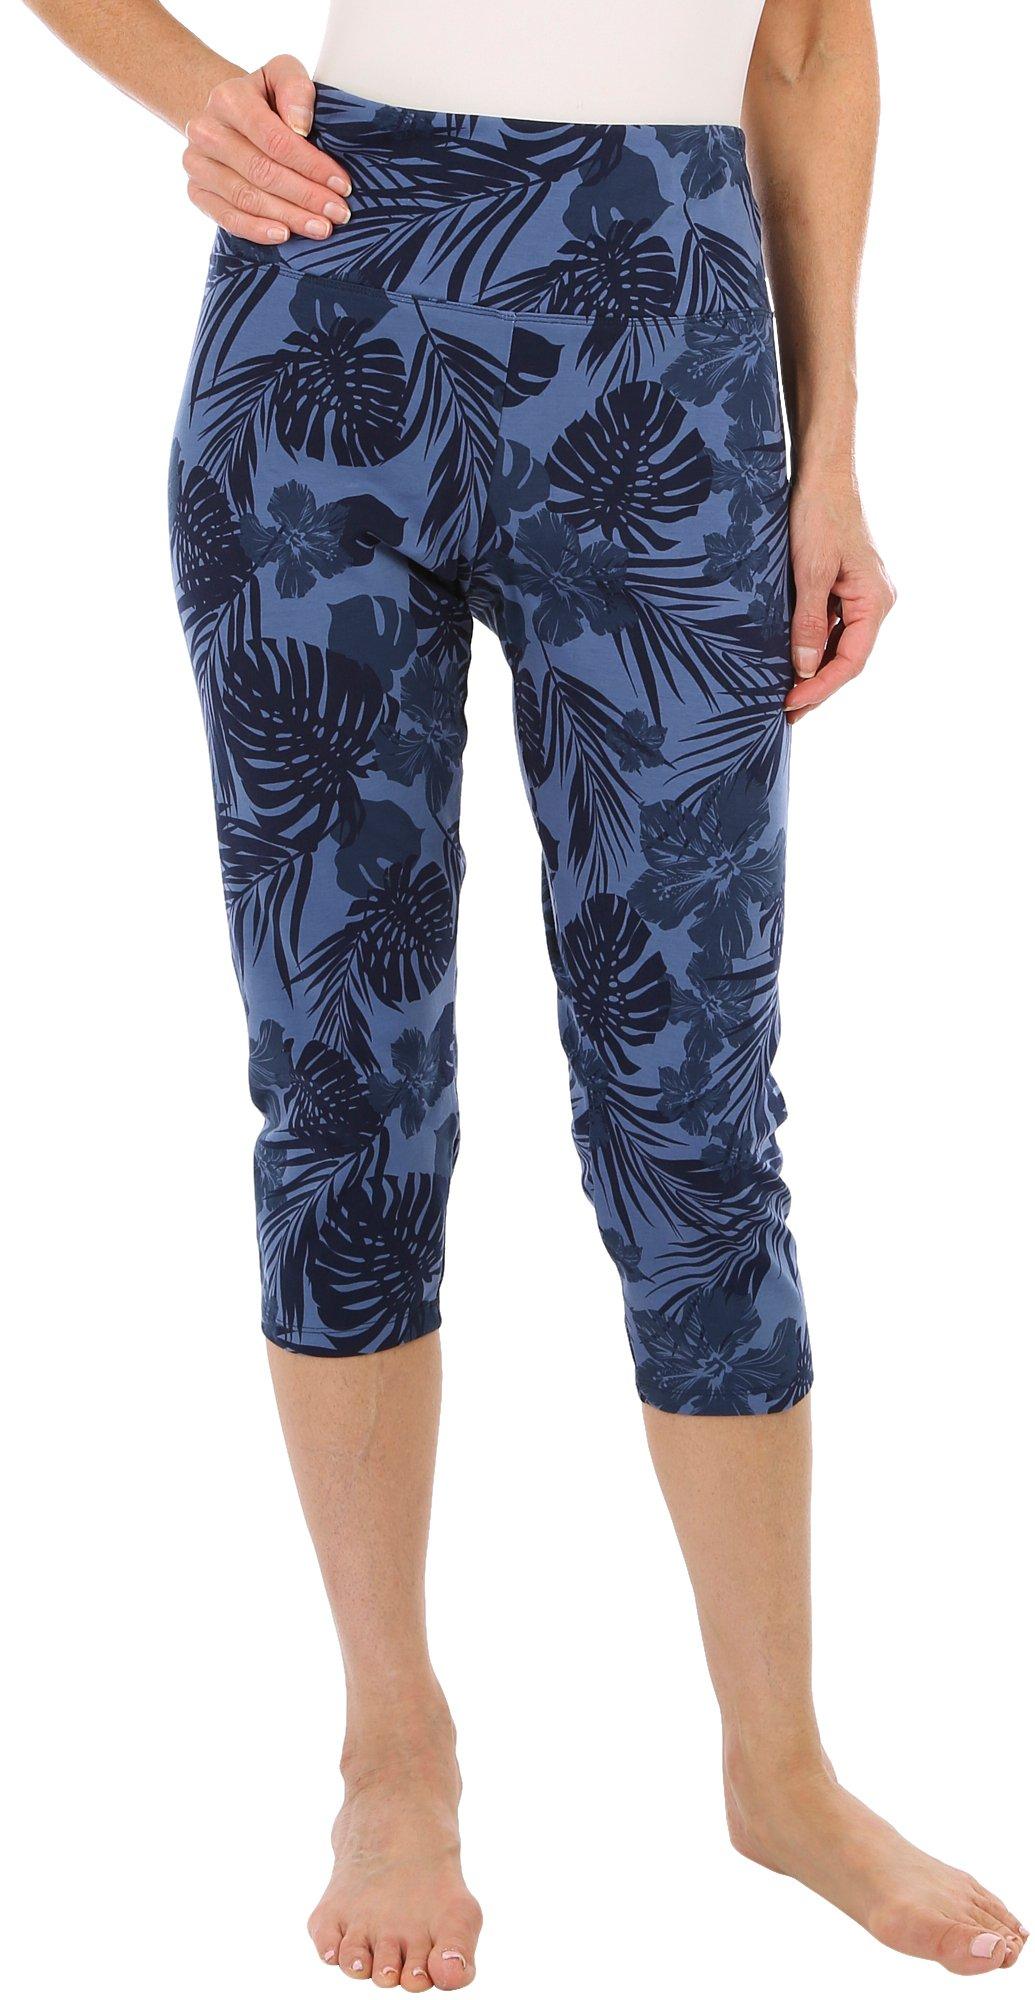 Khakis & Co Suave Womens 23 in. Hibiscus Floral Capris